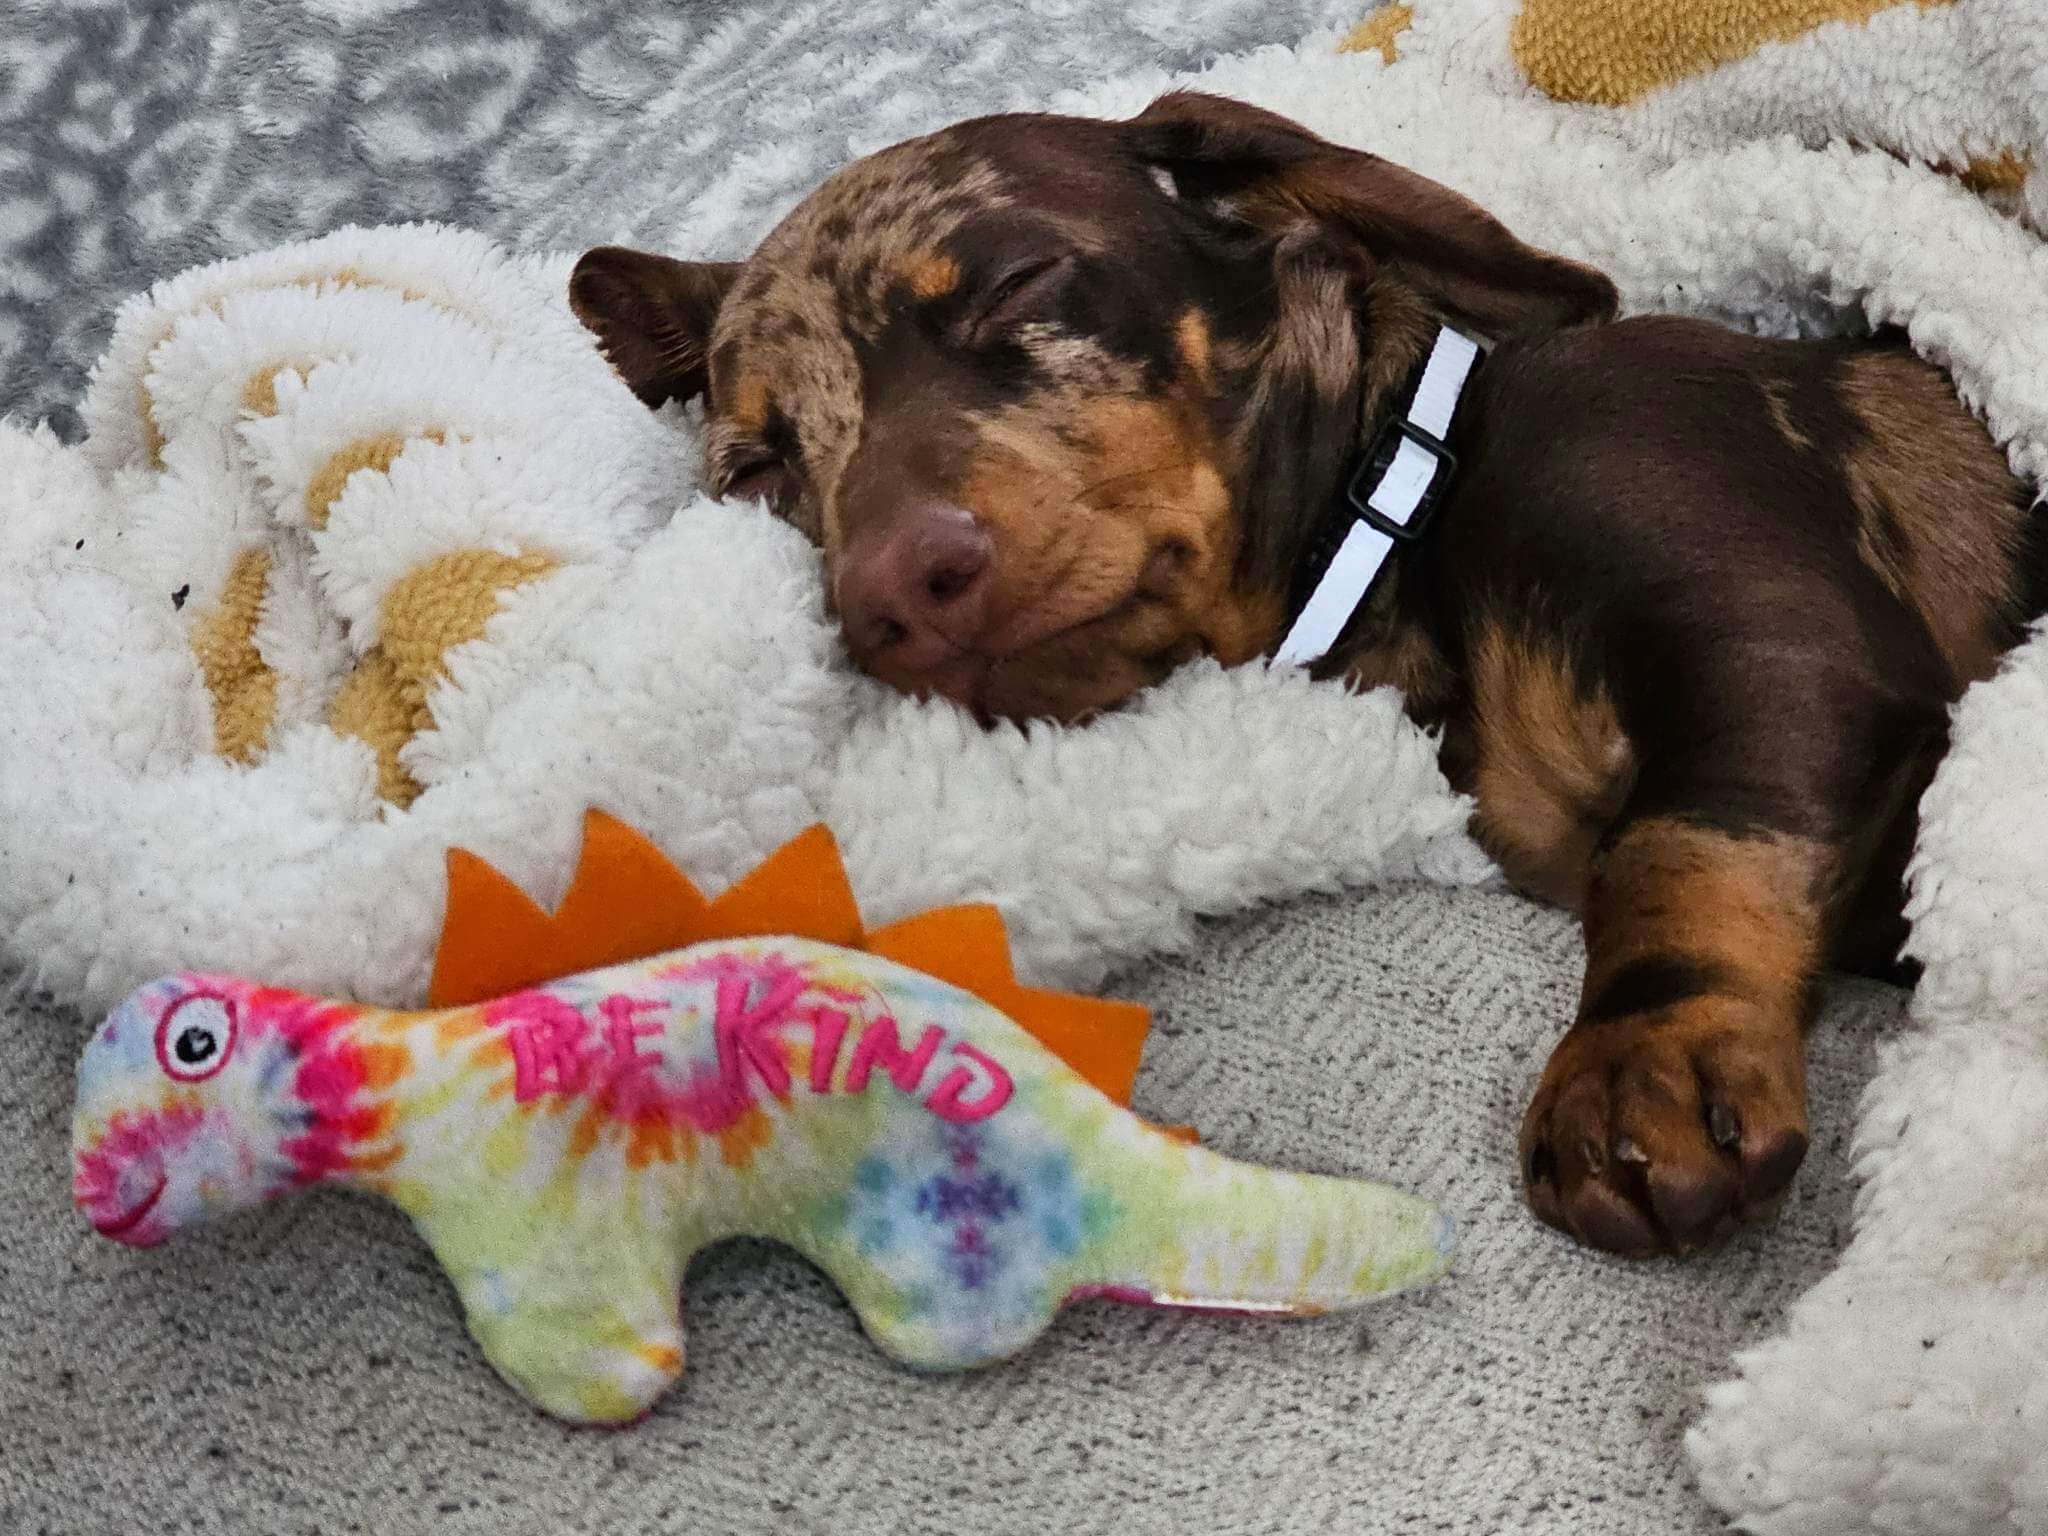 Tony is taking a nap with his favorite toy! It's hard being a puppy!